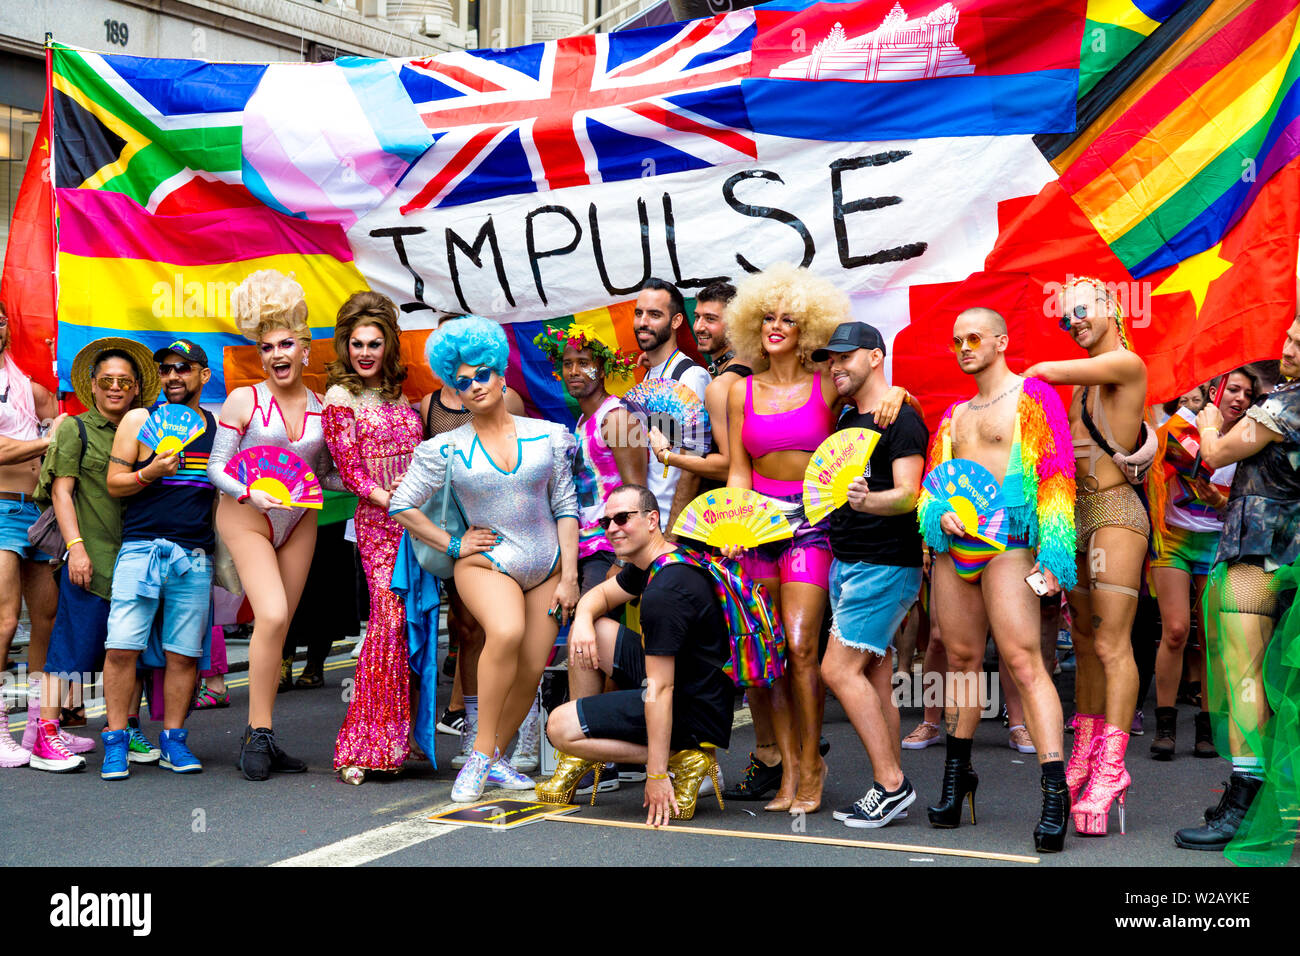 6 July 2019 - A group of drag queens posing in front of Impulse banner, London Pride Parade, UK Stock Photo